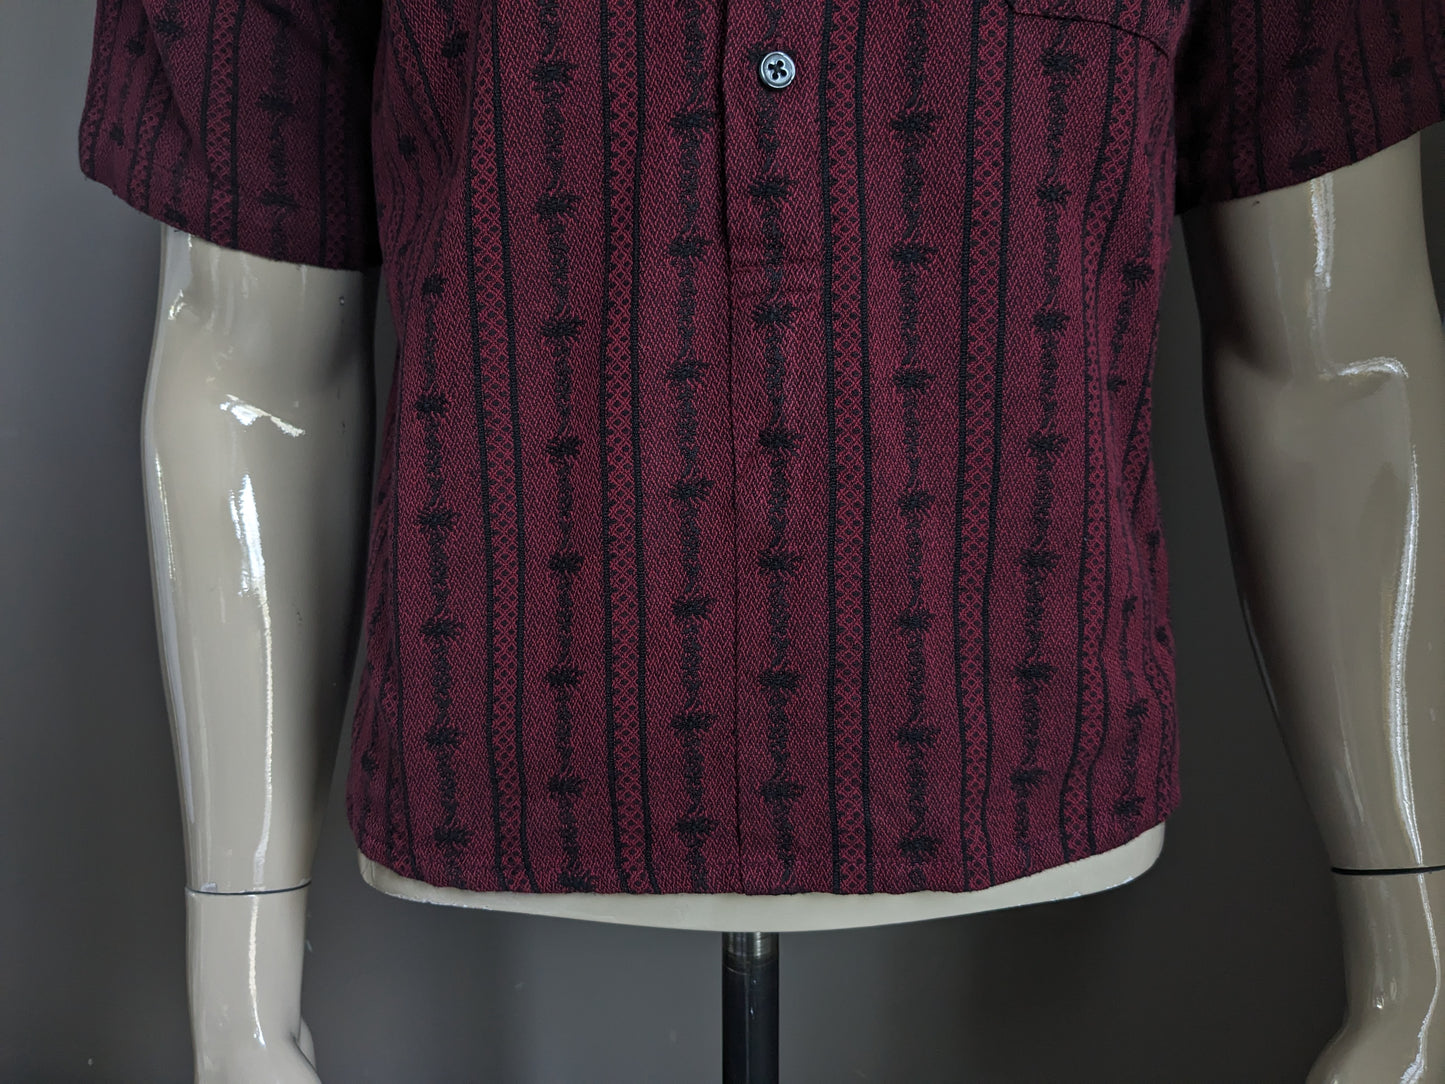 Vintage atrium shirt with buttons and mao / farmers / upright collar. Bordeaux Black colored. Size S / M.